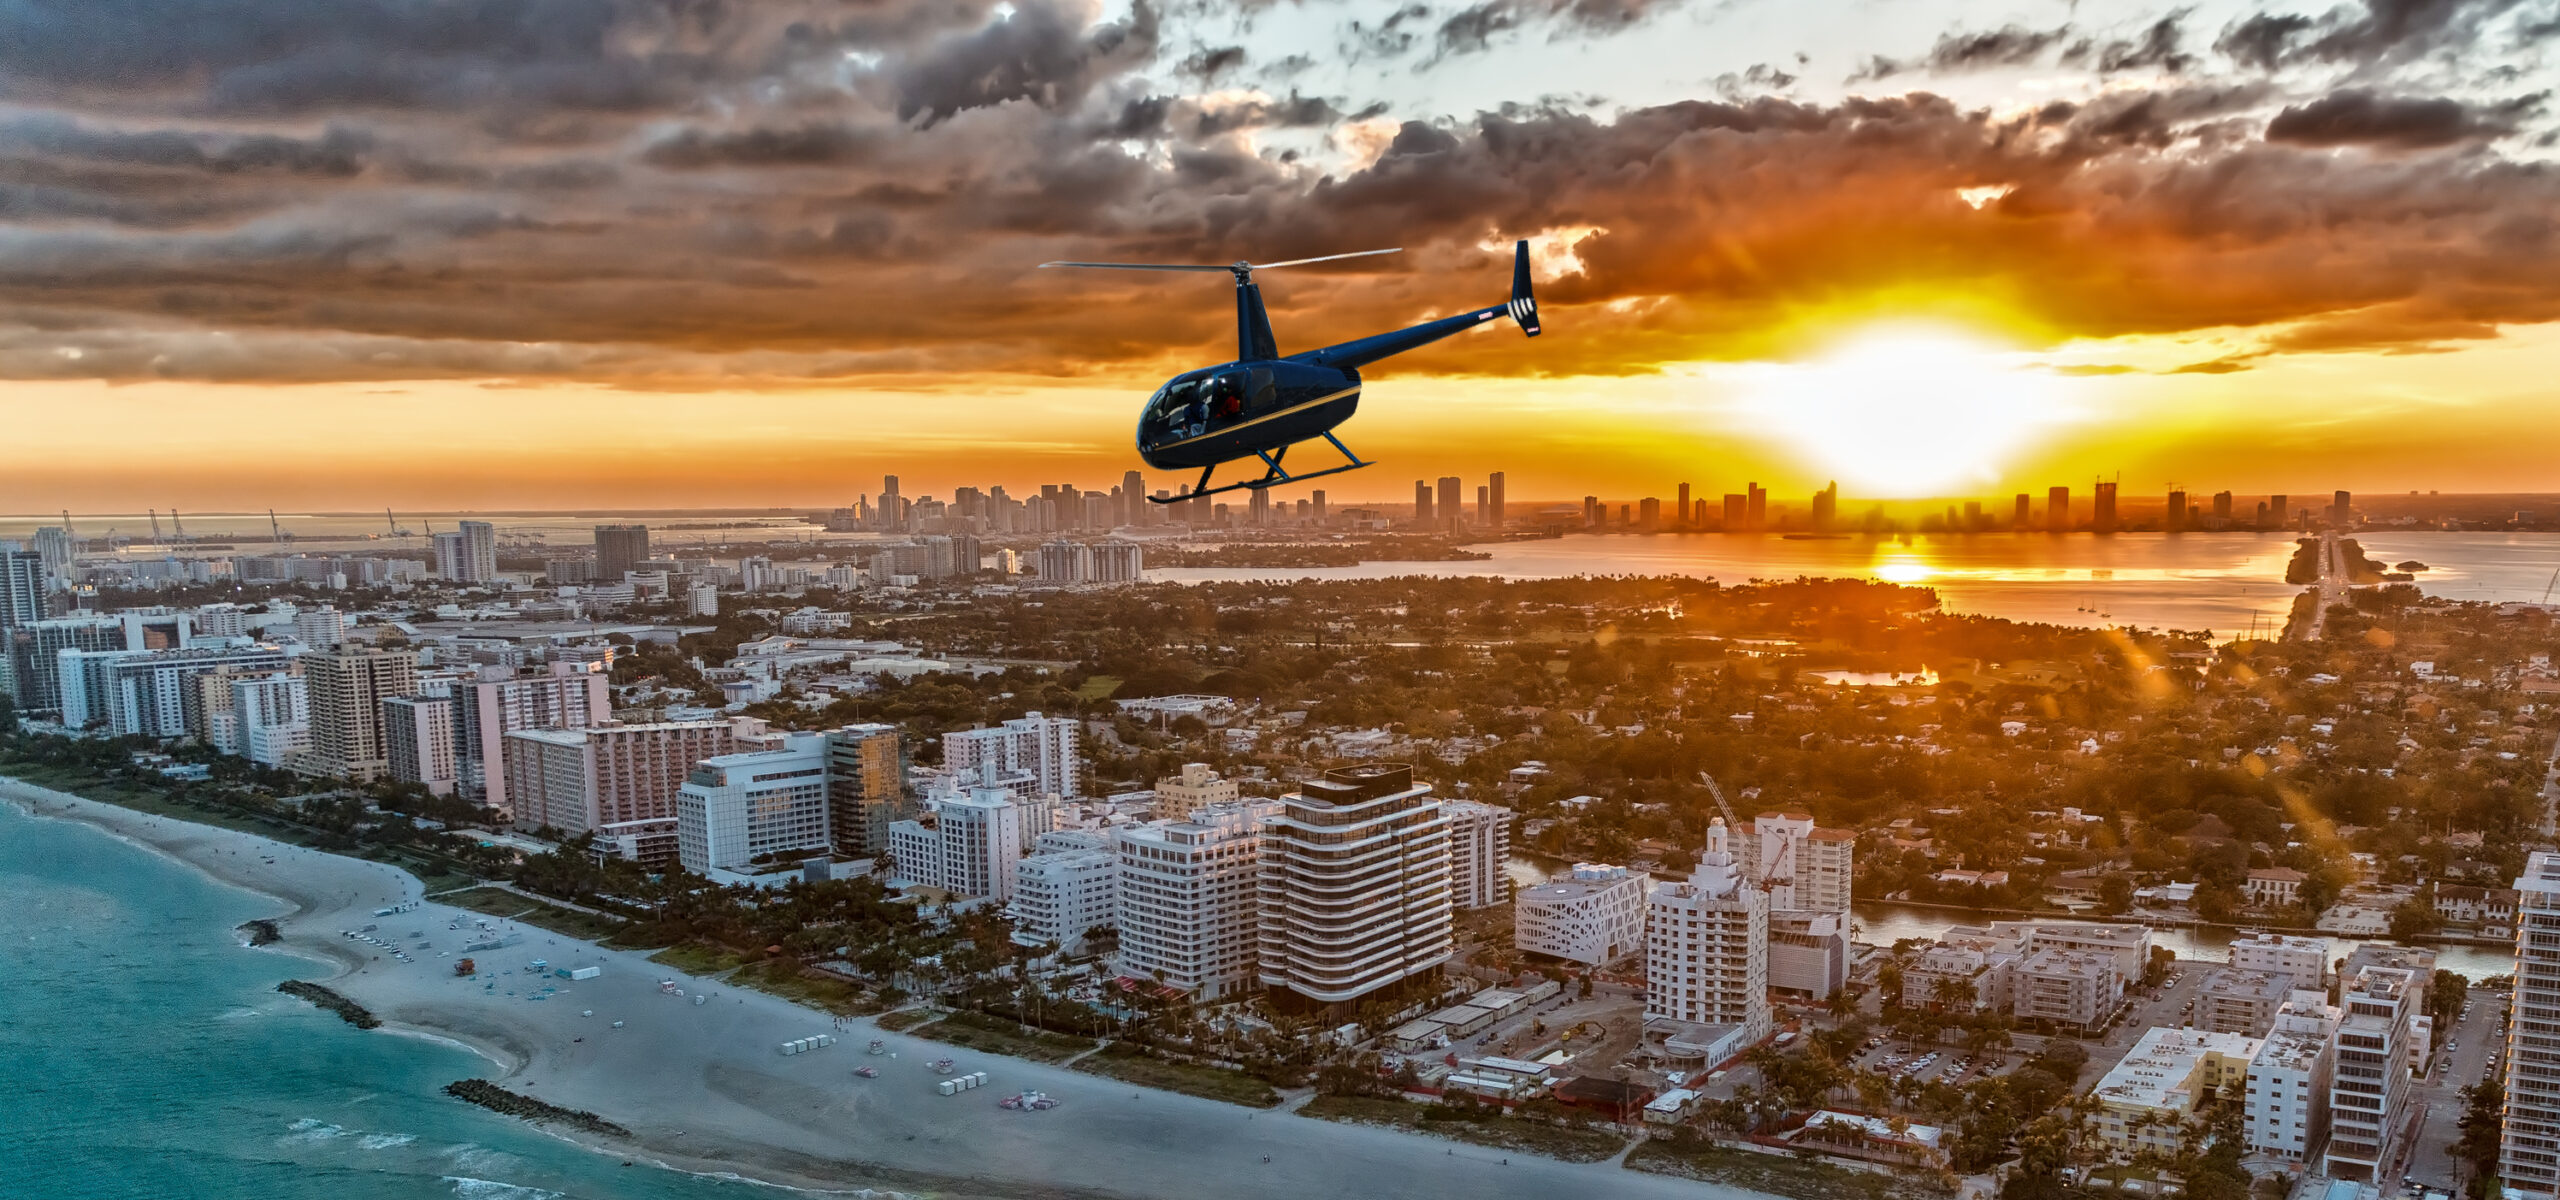 miami helicopter tour at night